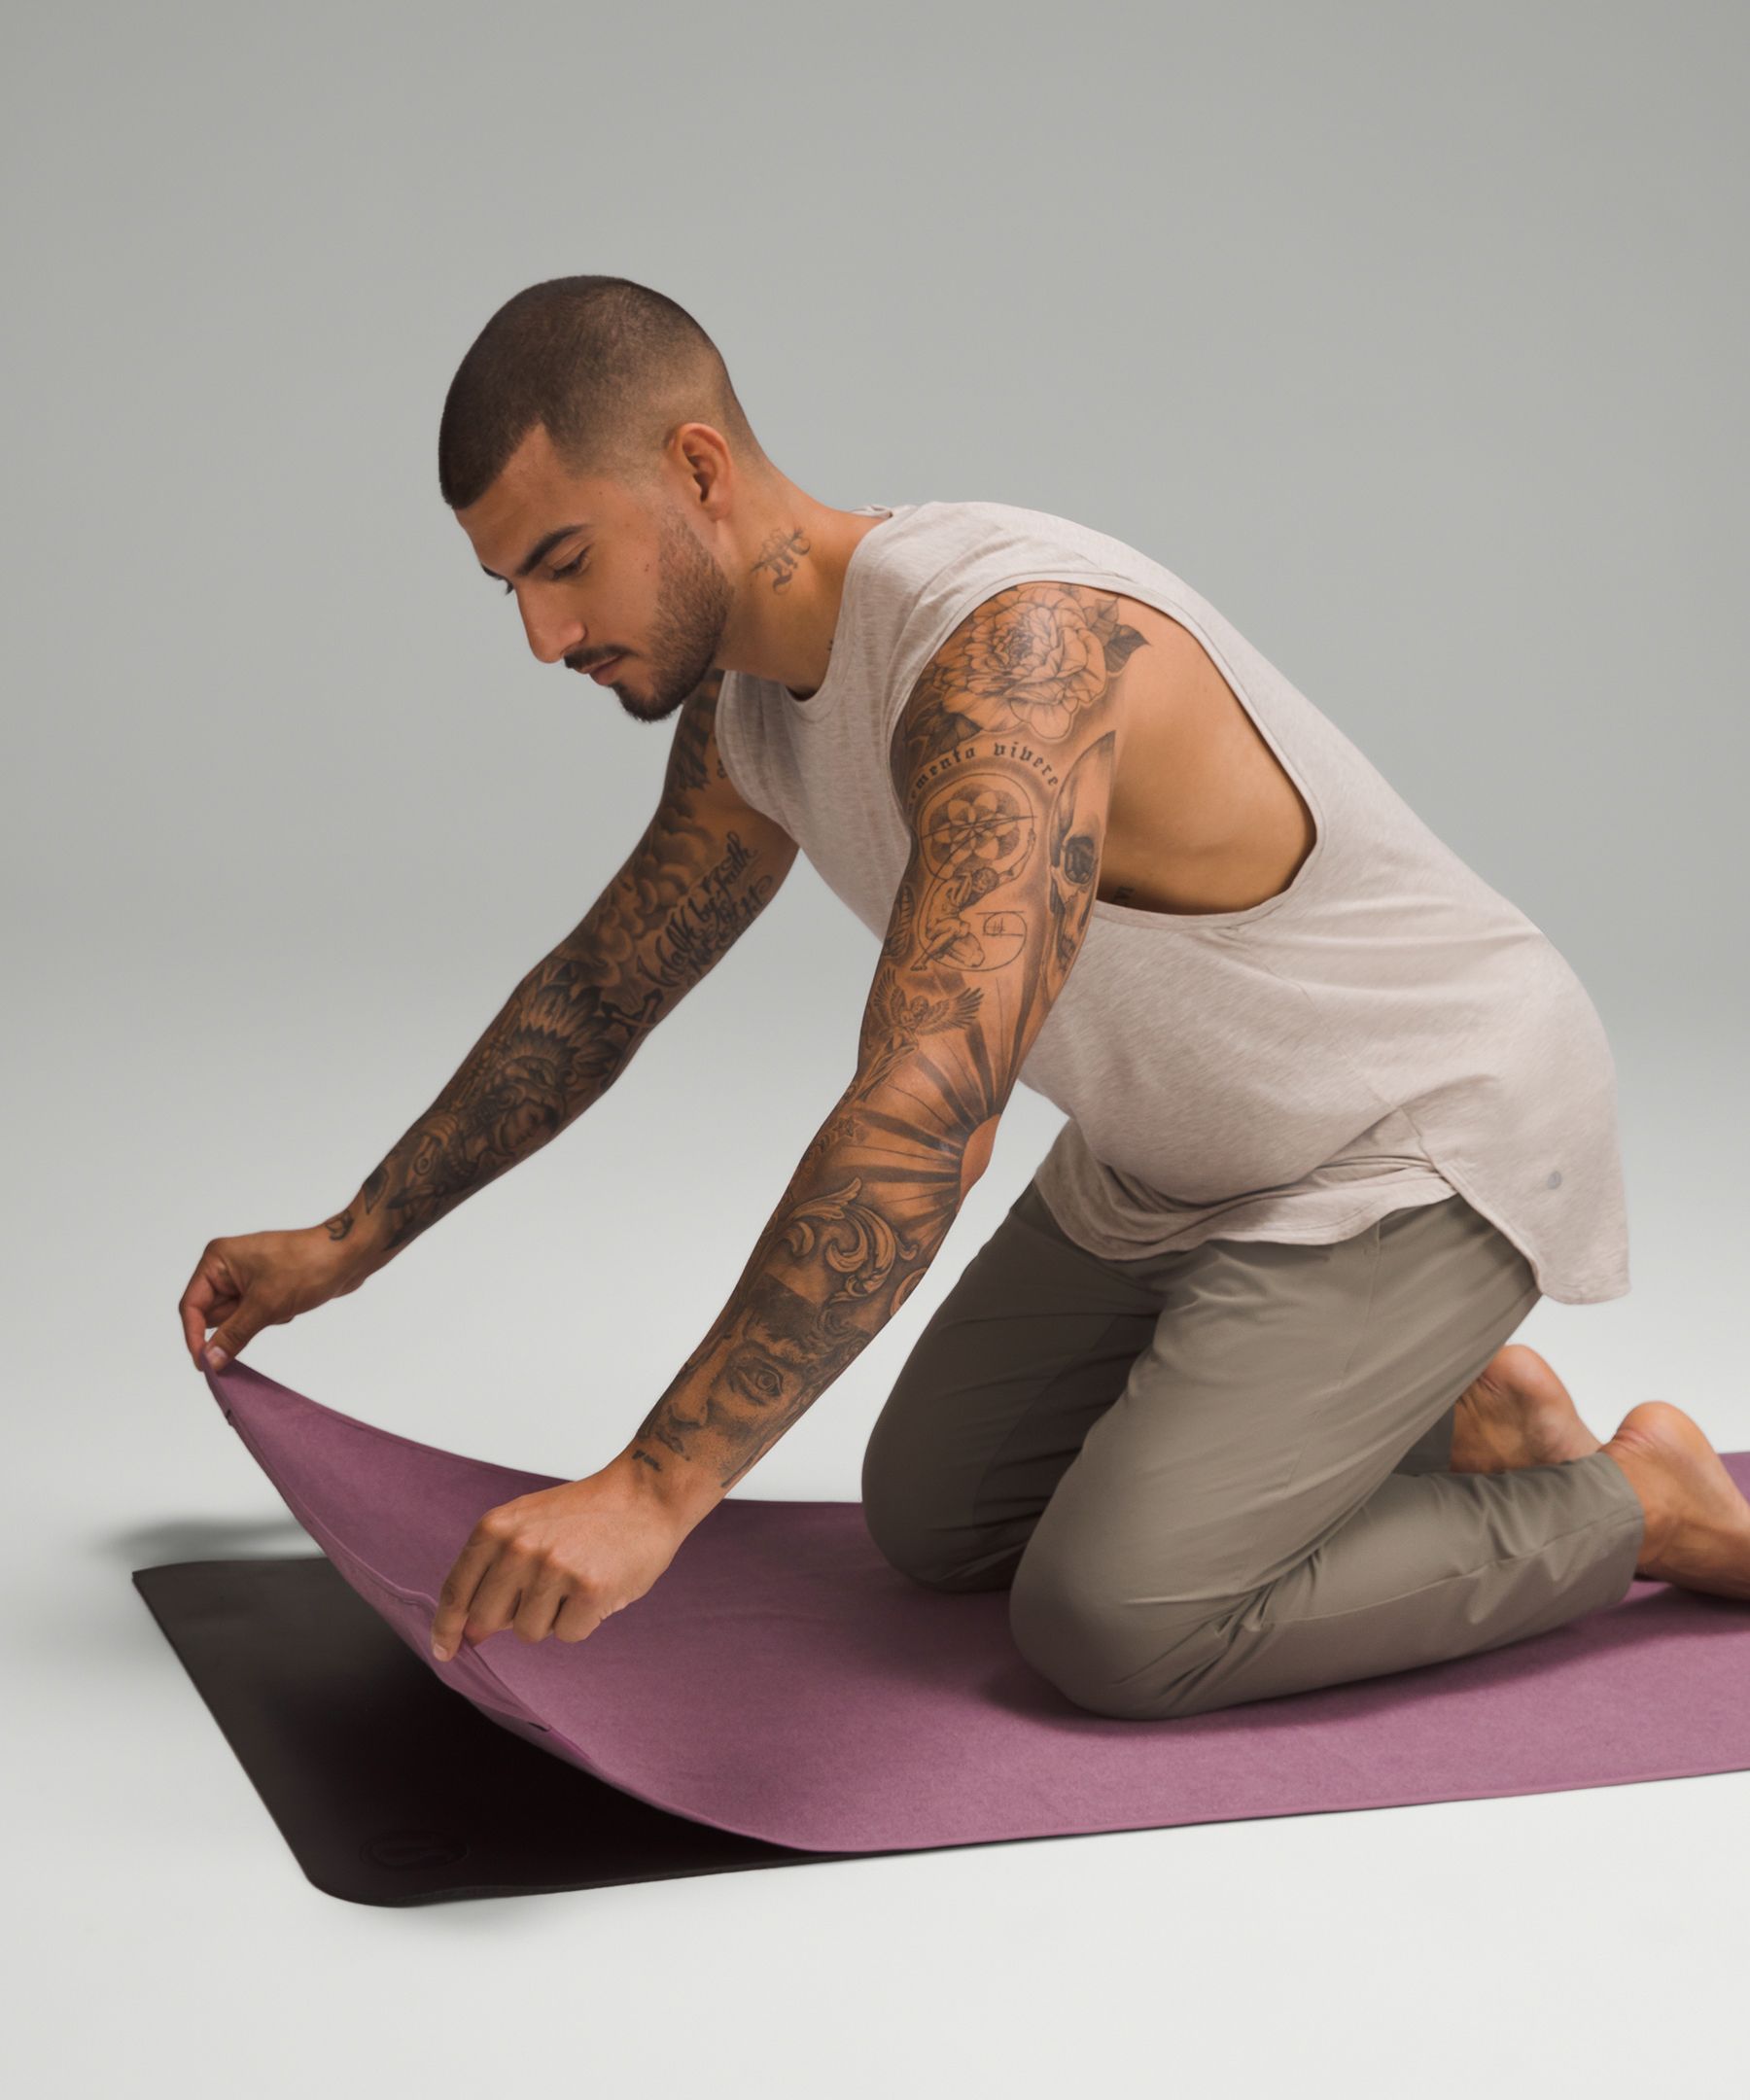 Yoga Mat Towel with Grip, Unisex Work Out Accessories